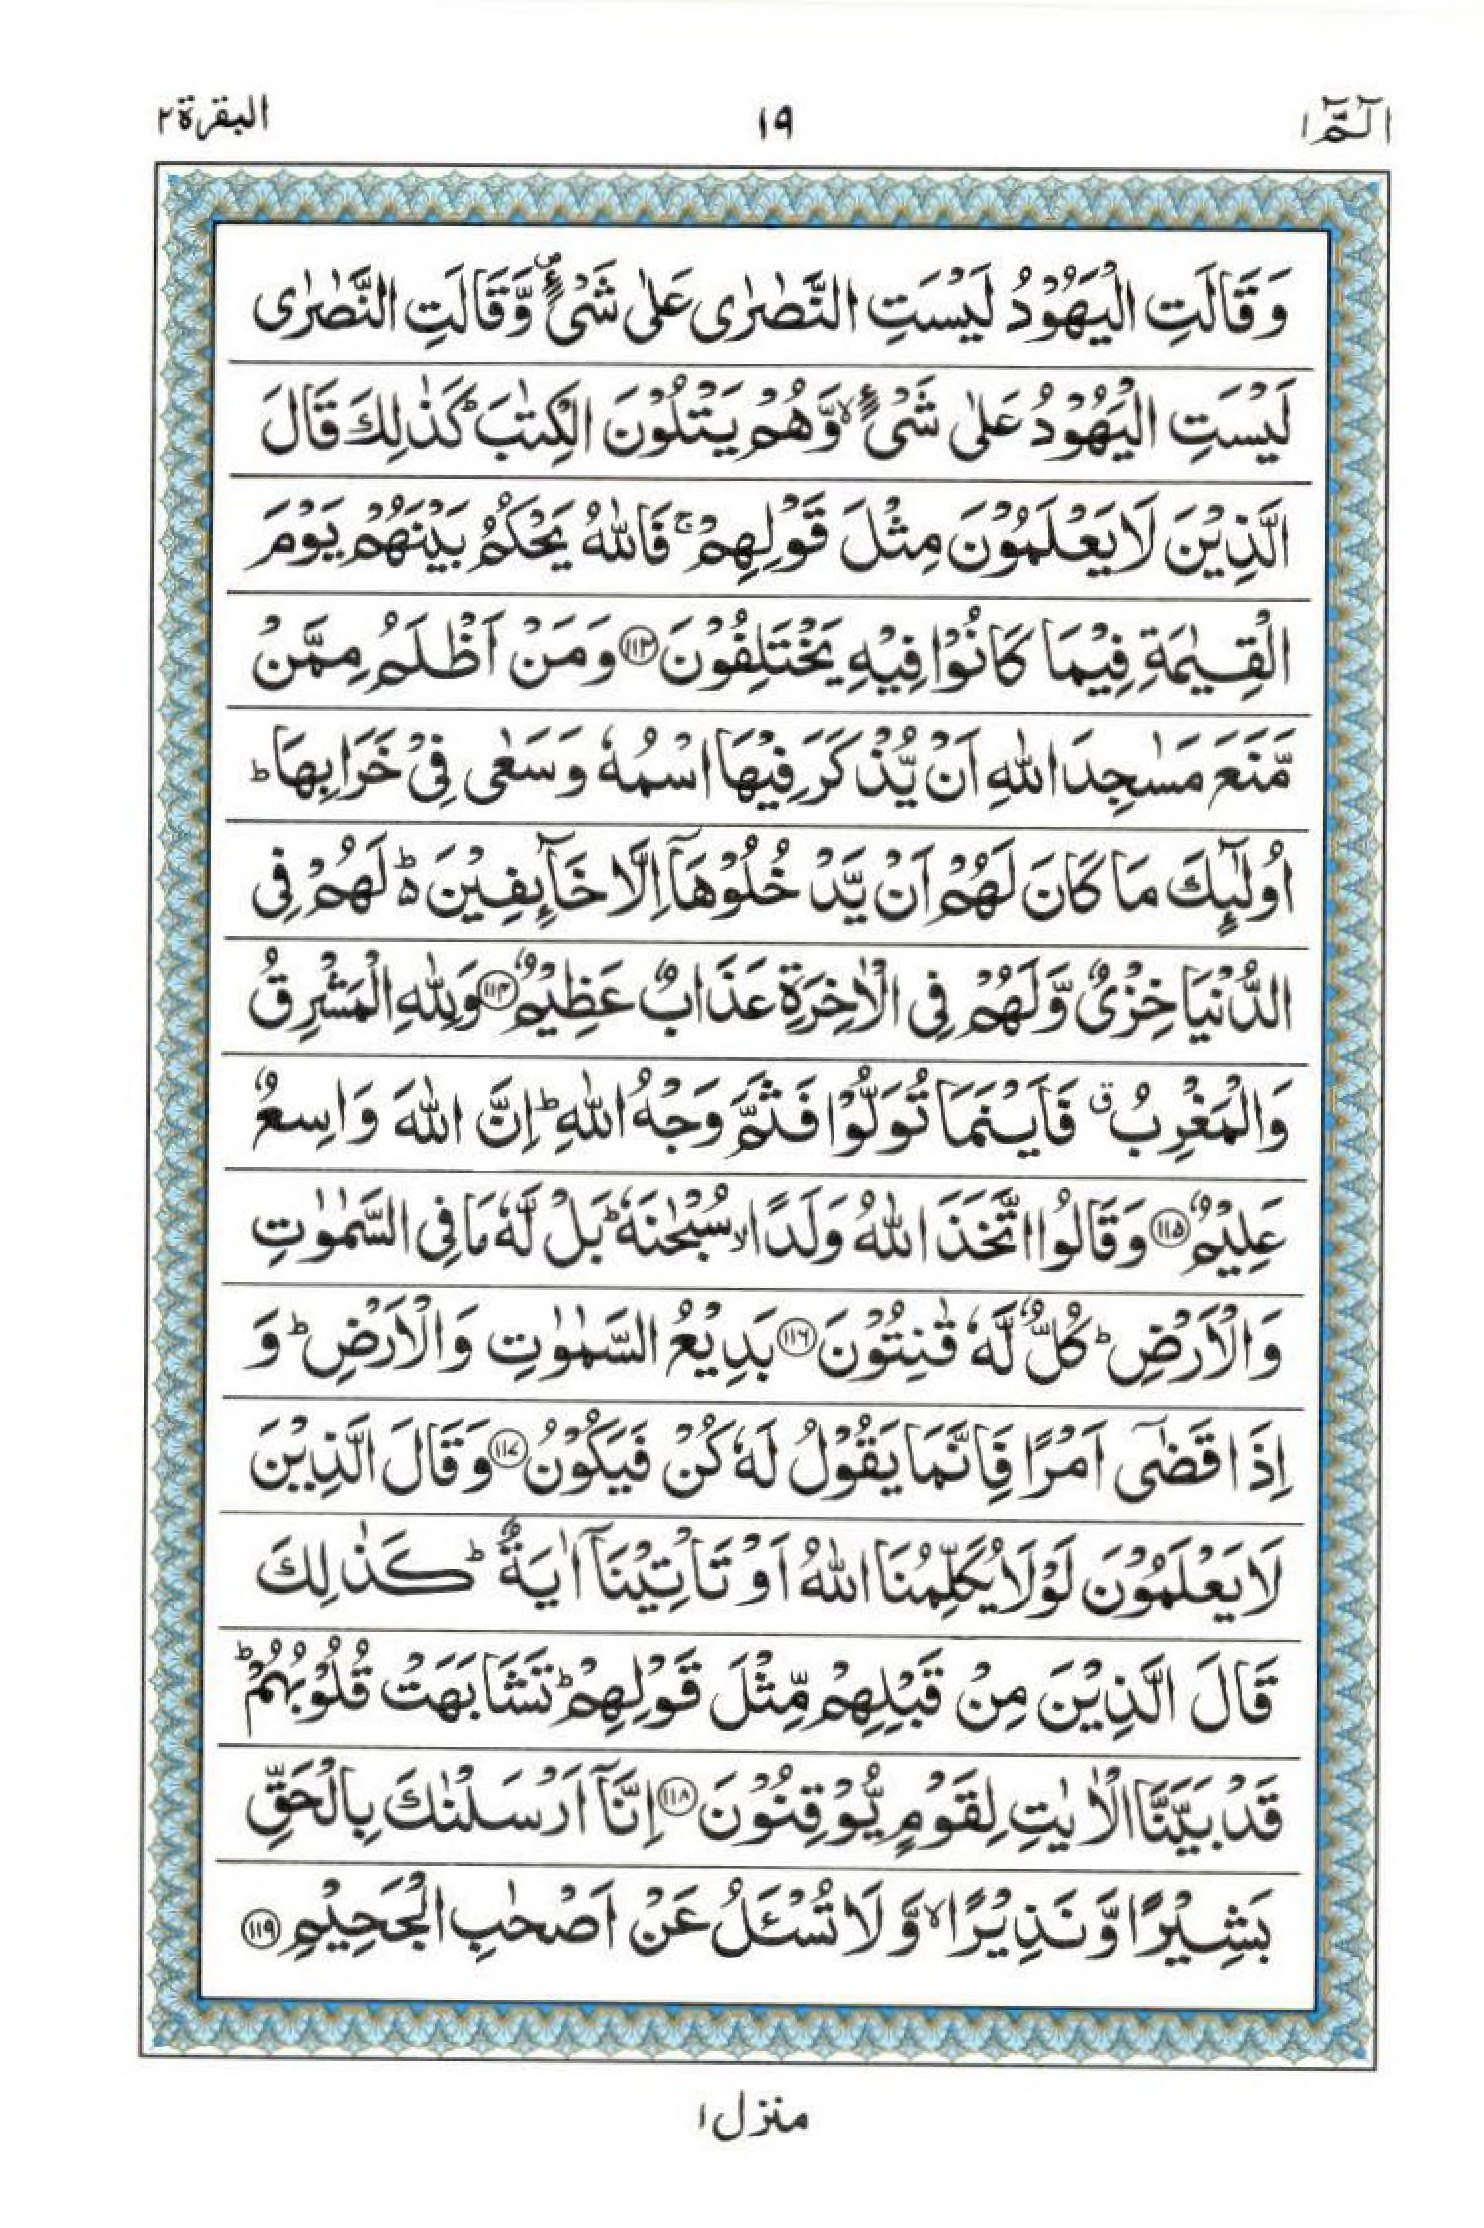 Read 15 Lines Quran, Part / Chapter / Siparah 1 Page 19